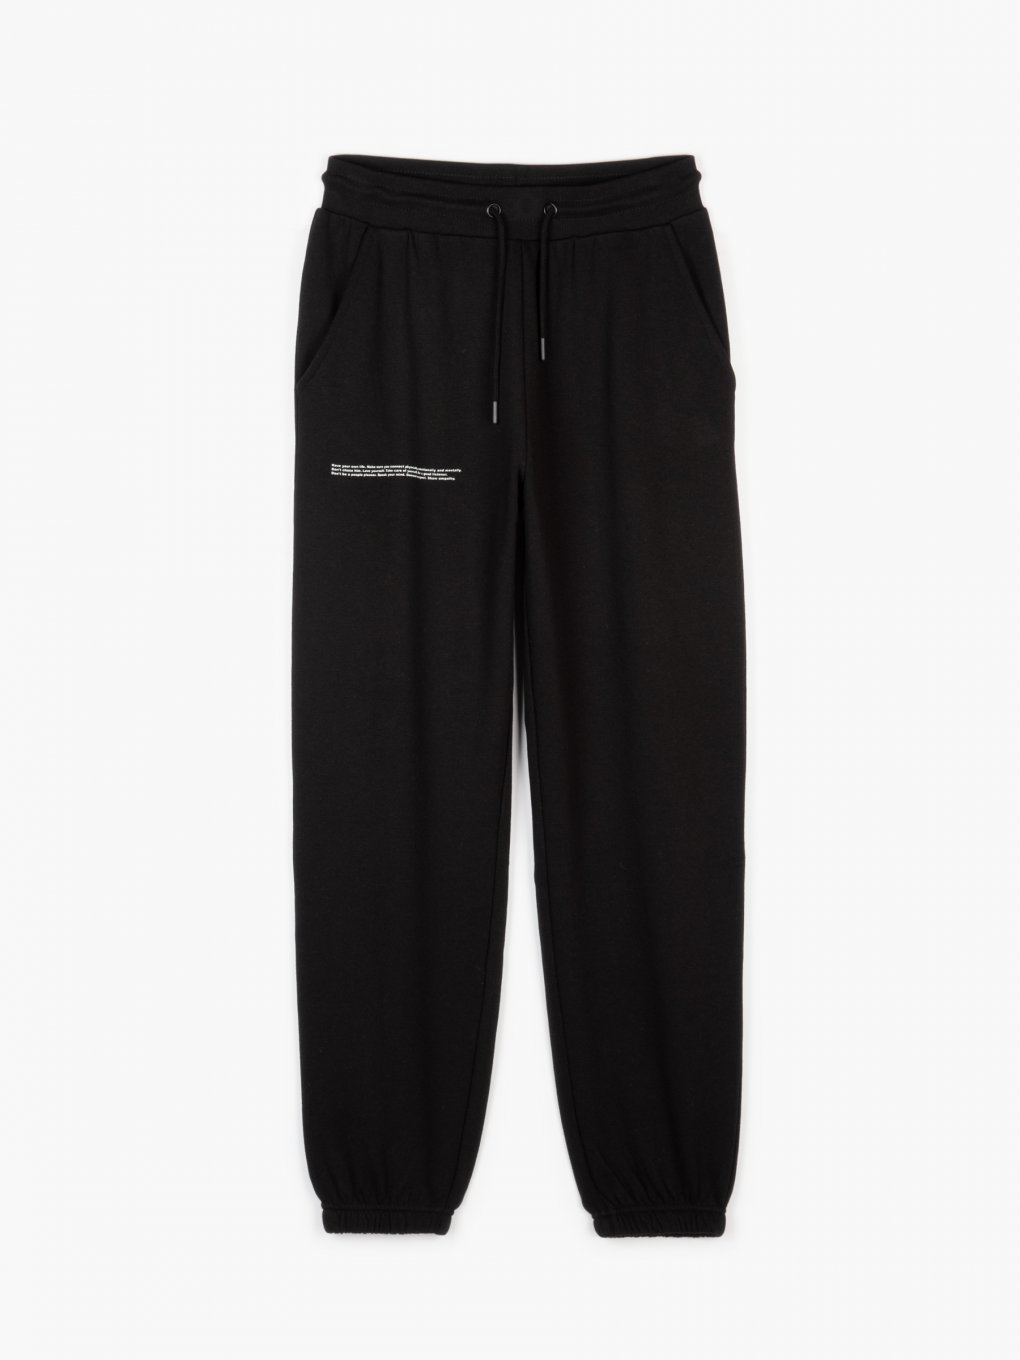 Lace up jogger fit sweatpants with message print and pockets